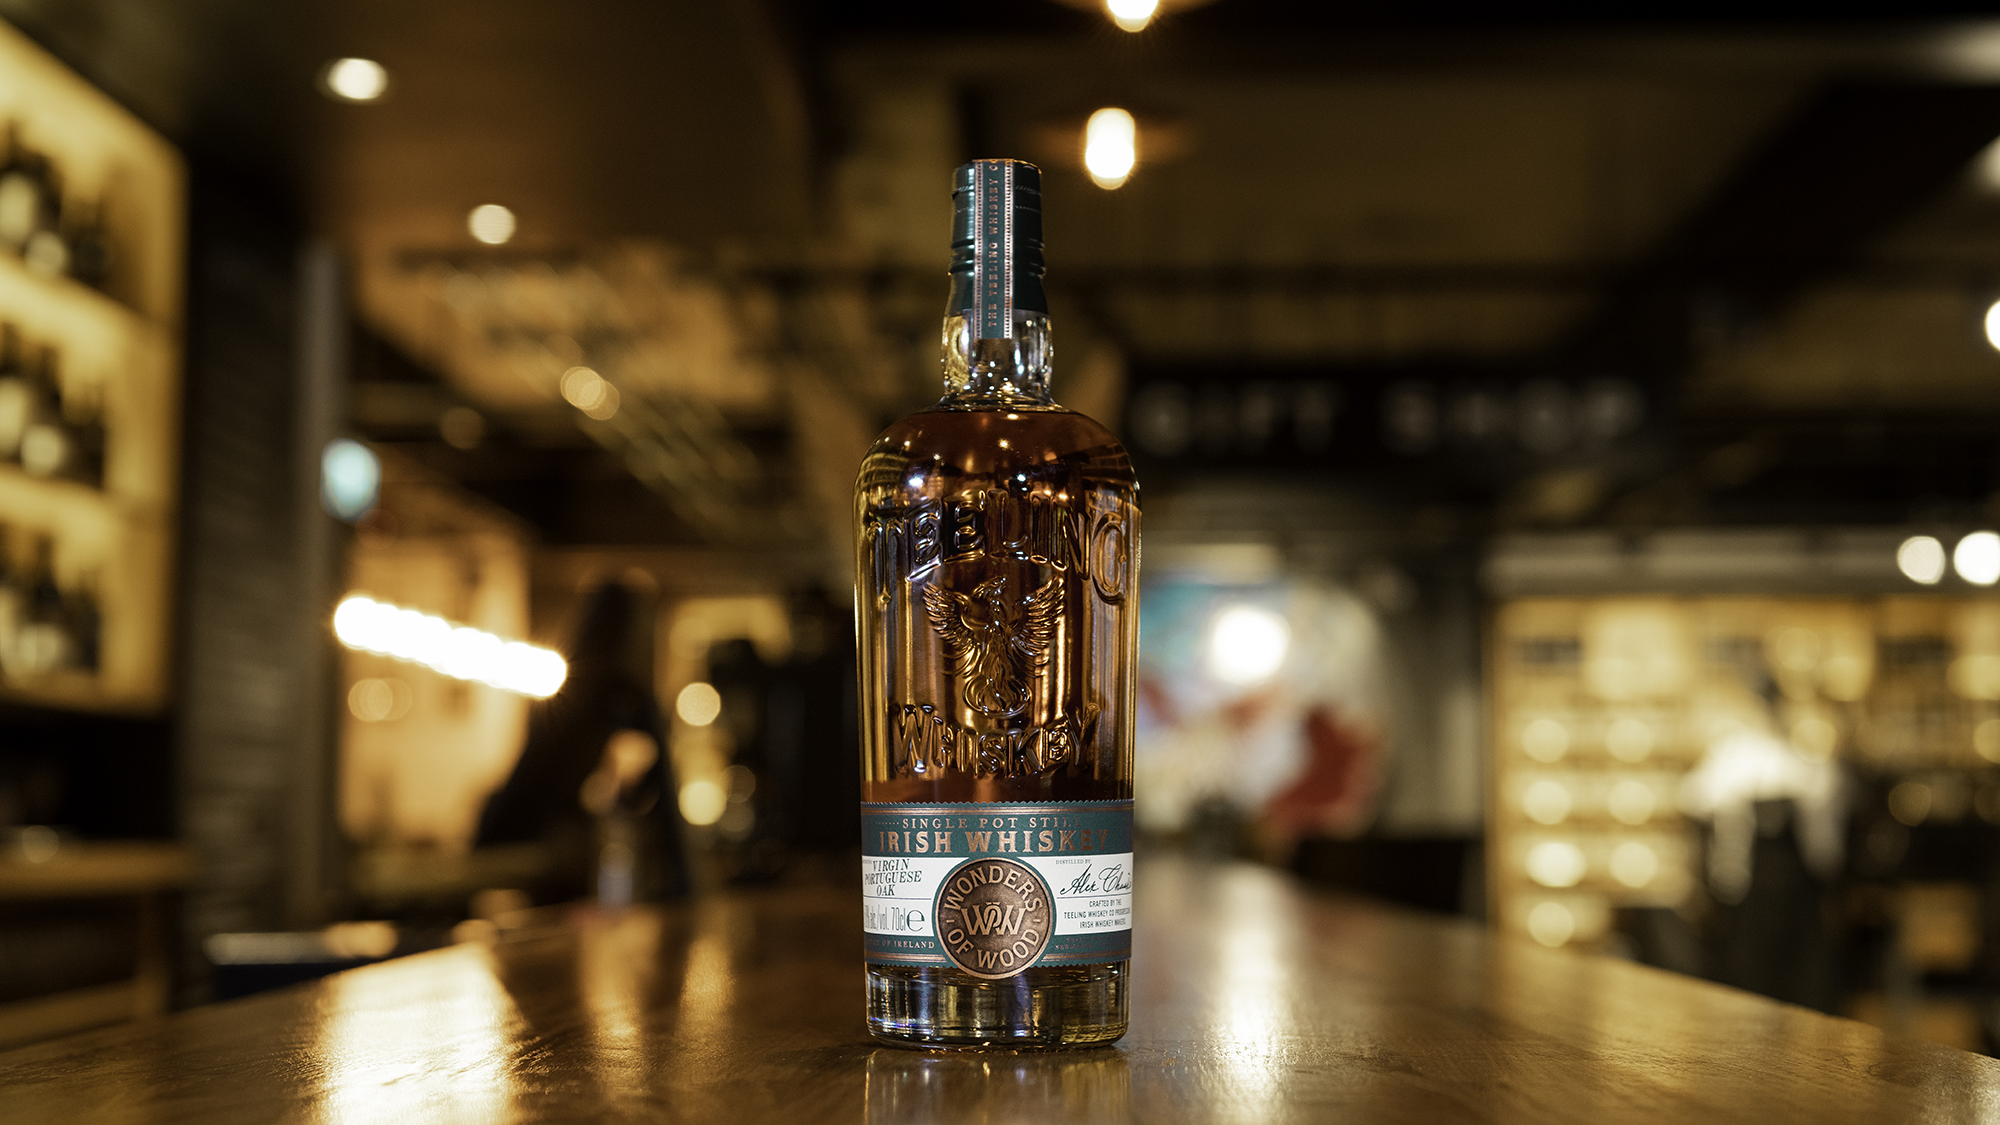 Teeling Launches Second Edition Of Wonder of Wood Single Pot Still Whiskey